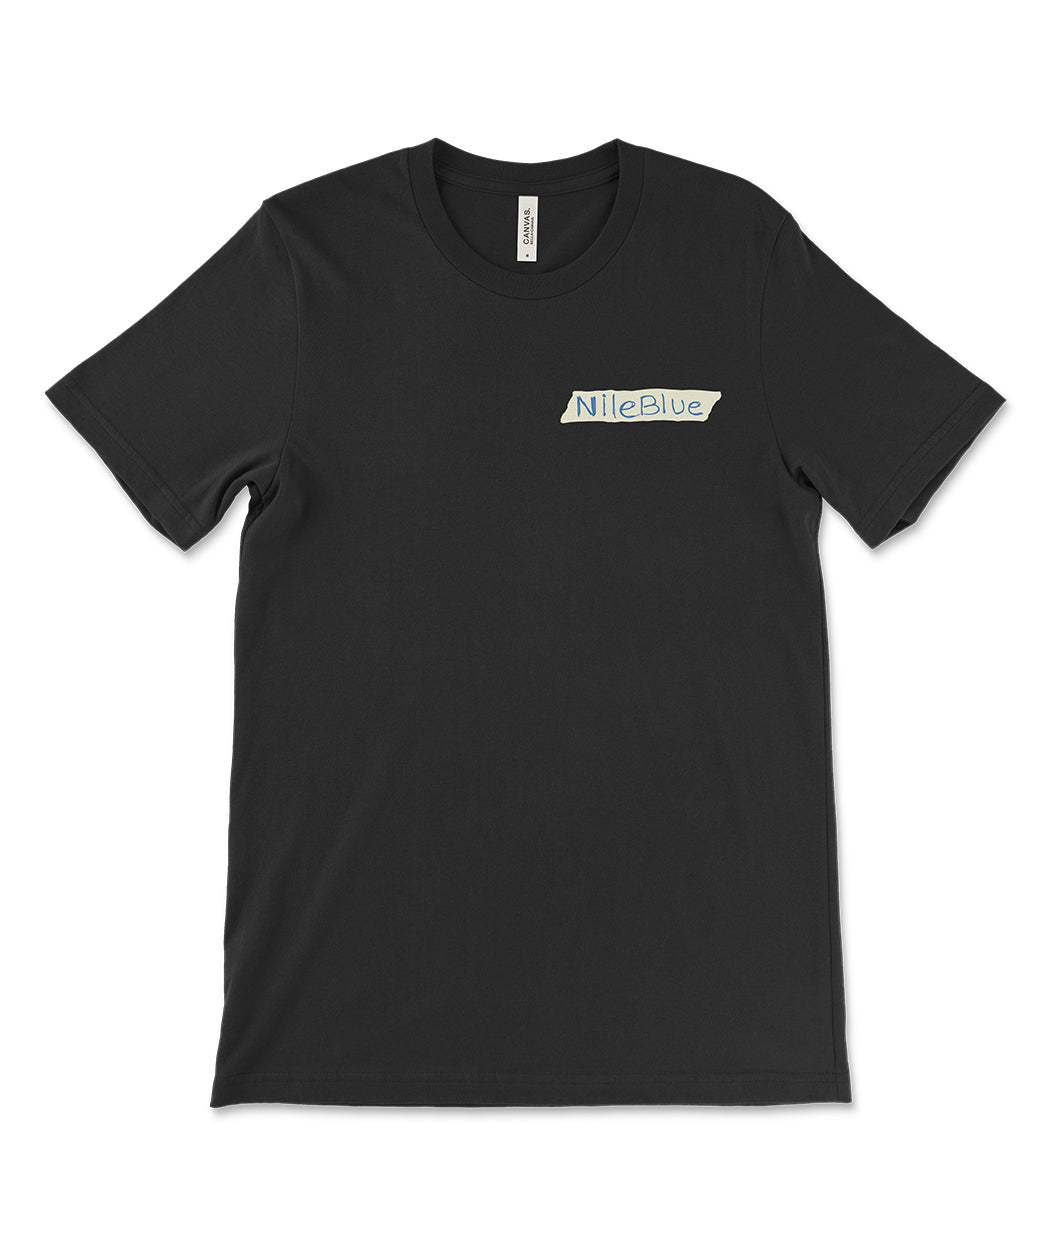 A black t-shirt with a print to look like a strip of masking tape in the upper right chest area with the text 